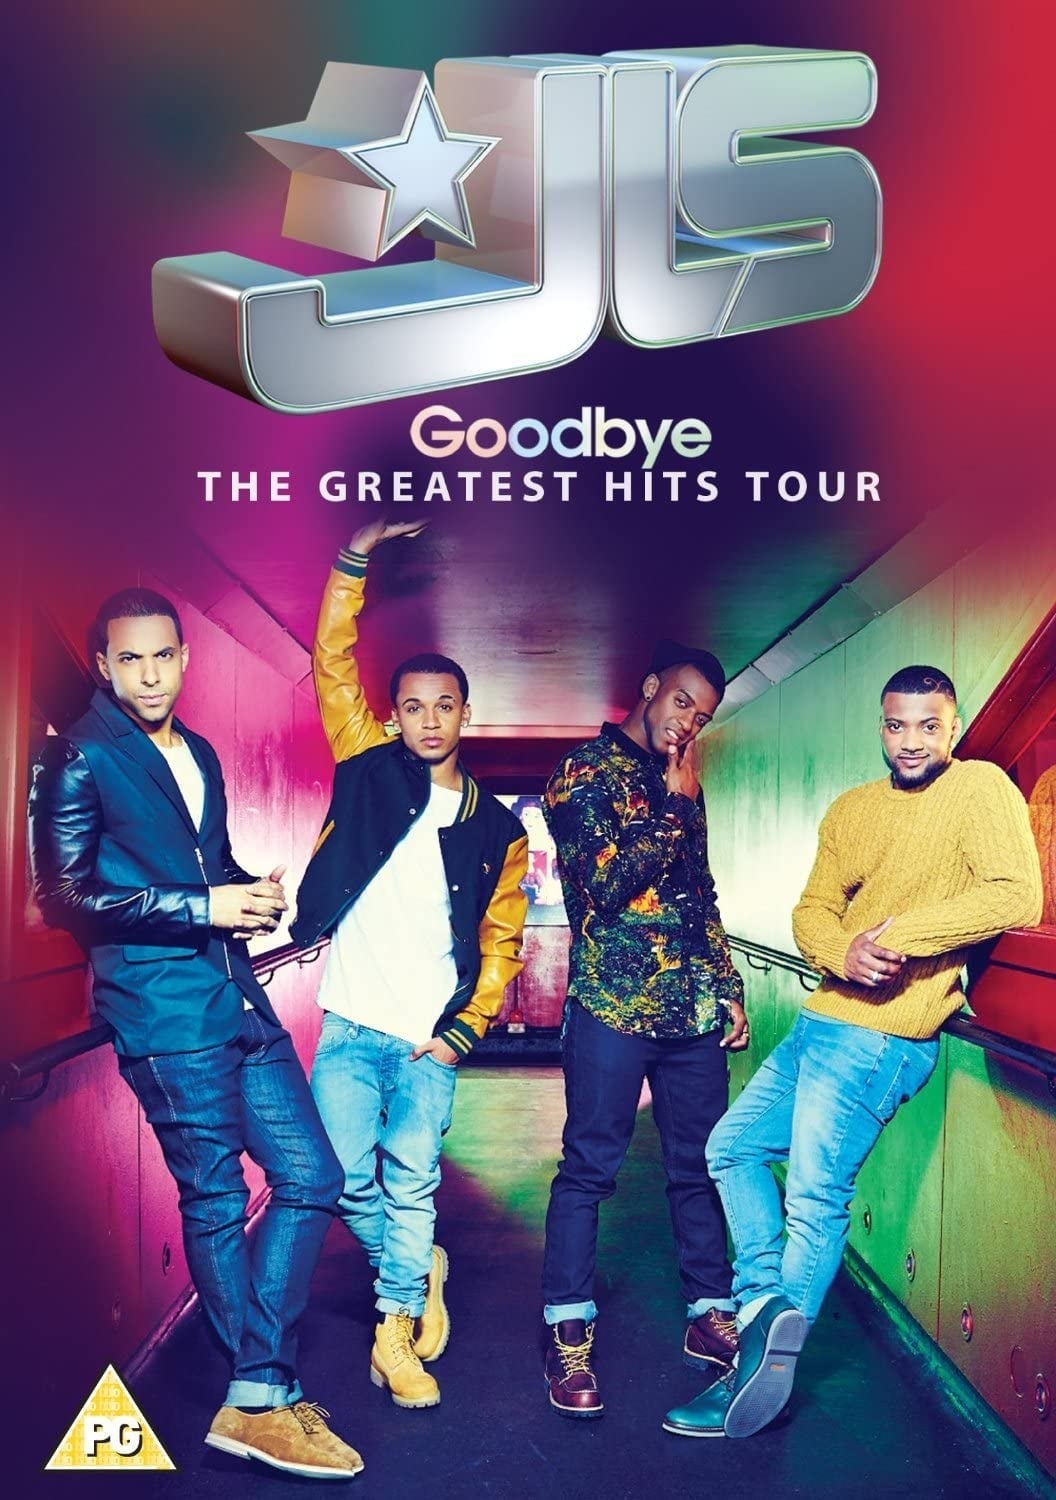 JLS: Goodbye - The Greatest Hits Tour